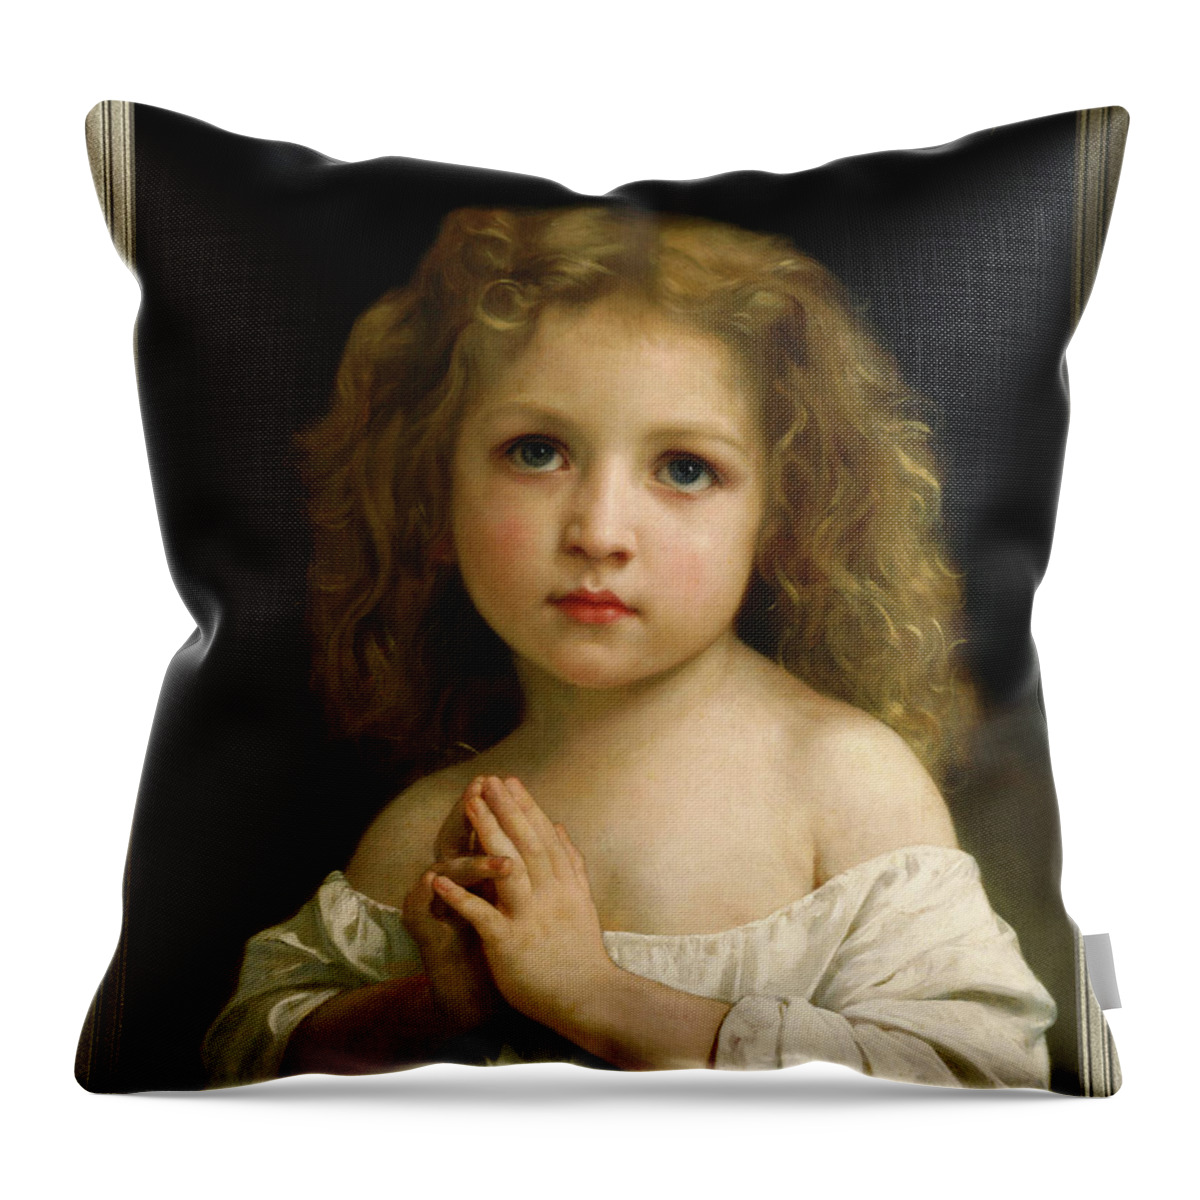 Little Girl Throw Pillow featuring the painting Little Girl by William Adolphe Bouguereau by Rolando Burbon